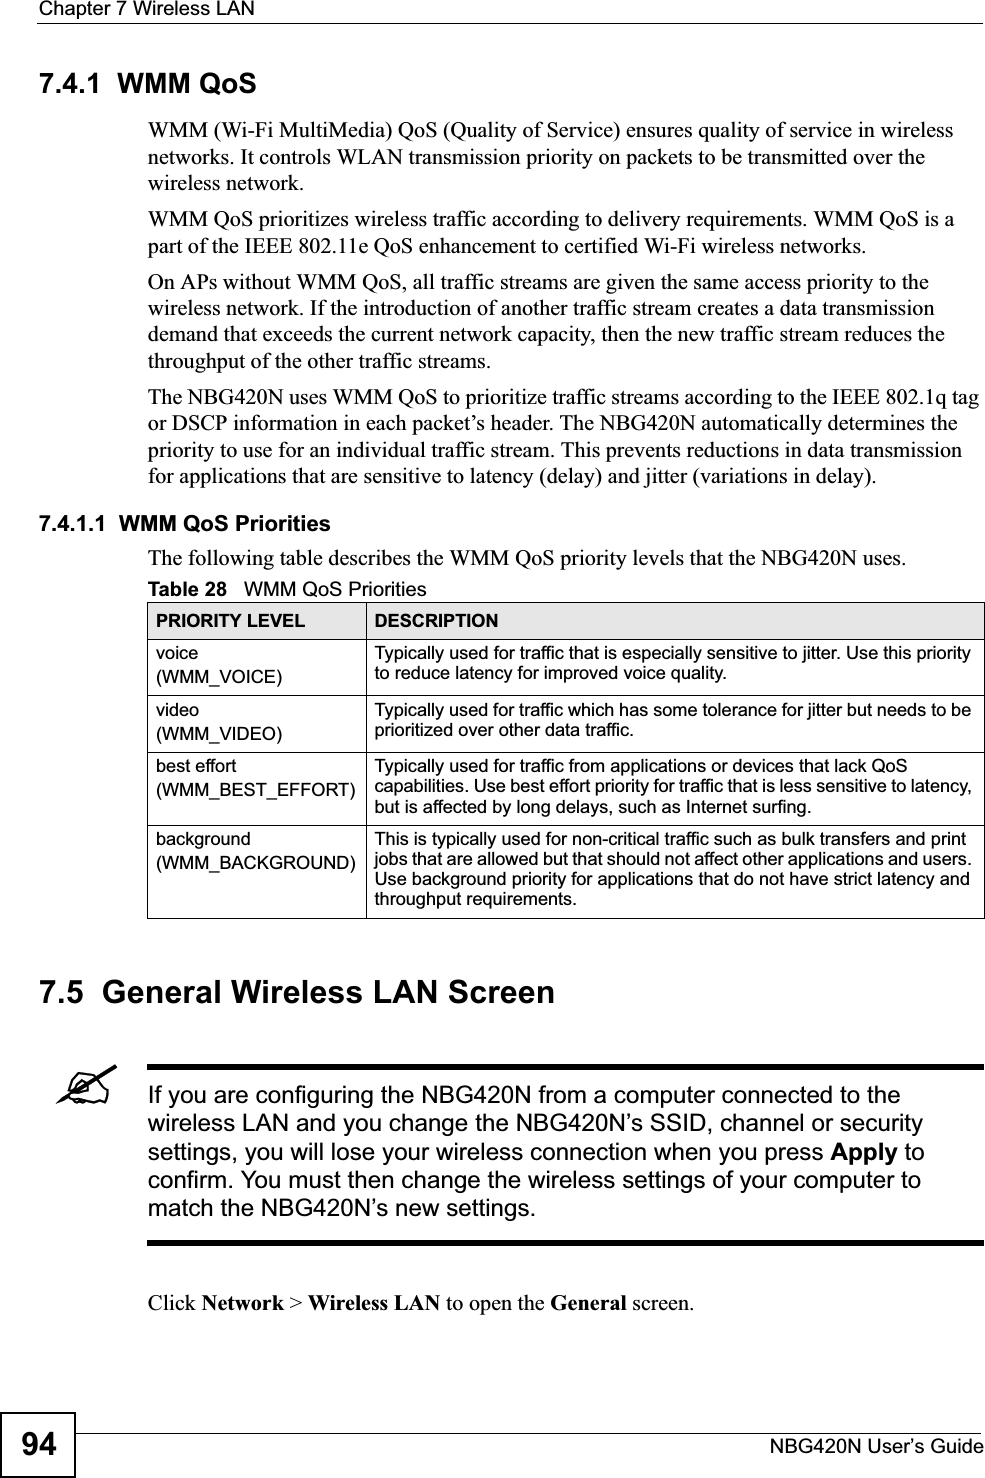 Chapter 7 Wireless LANNBG420N User’s Guide947.4.1  WMM QoSWMM (Wi-Fi MultiMedia) QoS (Quality of Service) ensures quality of service in wireless networks. It controls WLAN transmission priority on packets to be transmitted over the wireless network.WMM QoS prioritizes wireless traffic according to delivery requirements. WMM QoS is a part of the IEEE 802.11e QoS enhancement to certified Wi-Fi wireless networks.On APs without WMM QoS, all traffic streams are given the same access priority to the wireless network. If the introduction of another traffic stream creates a data transmission demand that exceeds the current network capacity, then the new traffic stream reduces the throughput of the other traffic streams.The NBG420N uses WMM QoS to prioritize traffic streams according to the IEEE 802.1q tag or DSCP information in each packet’s header. The NBG420N automatically determines the priority to use for an individual traffic stream. This prevents reductions in data transmission for applications that are sensitive to latency (delay) and jitter (variations in delay).7.4.1.1  WMM QoS PrioritiesThe following table describes the WMM QoS priority levels that the NBG420N uses.7.5  General Wireless LAN Screen &quot;If you are configuring the NBG420N from a computer connected to the wireless LAN and you change the NBG420N’s SSID, channel or security settings, you will lose your wireless connection when you press Apply to confirm. You must then change the wireless settings of your computer to match the NBG420N’s new settings.Click Network &gt; Wireless LAN to open the General screen.Table 28   WMM QoS PrioritiesPRIORITY LEVEL DESCRIPTIONvoice(WMM_VOICE)Typically used for traffic that is especially sensitive to jitter. Use this priority to reduce latency for improved voice quality.video(WMM_VIDEO)Typically used for traffic which has some tolerance for jitter but needs to be prioritized over other data traffic.best effort(WMM_BEST_EFFORT)Typically used for traffic from applications or devices that lack QoS capabilities. Use best effort priority for traffic that is less sensitive to latency, but is affected by long delays, such as Internet surfing.background(WMM_BACKGROUND)This is typically used for non-critical traffic such as bulk transfers and print jobs that are allowed but that should not affect other applications and users. Use background priority for applications that do not have strict latency and throughput requirements.